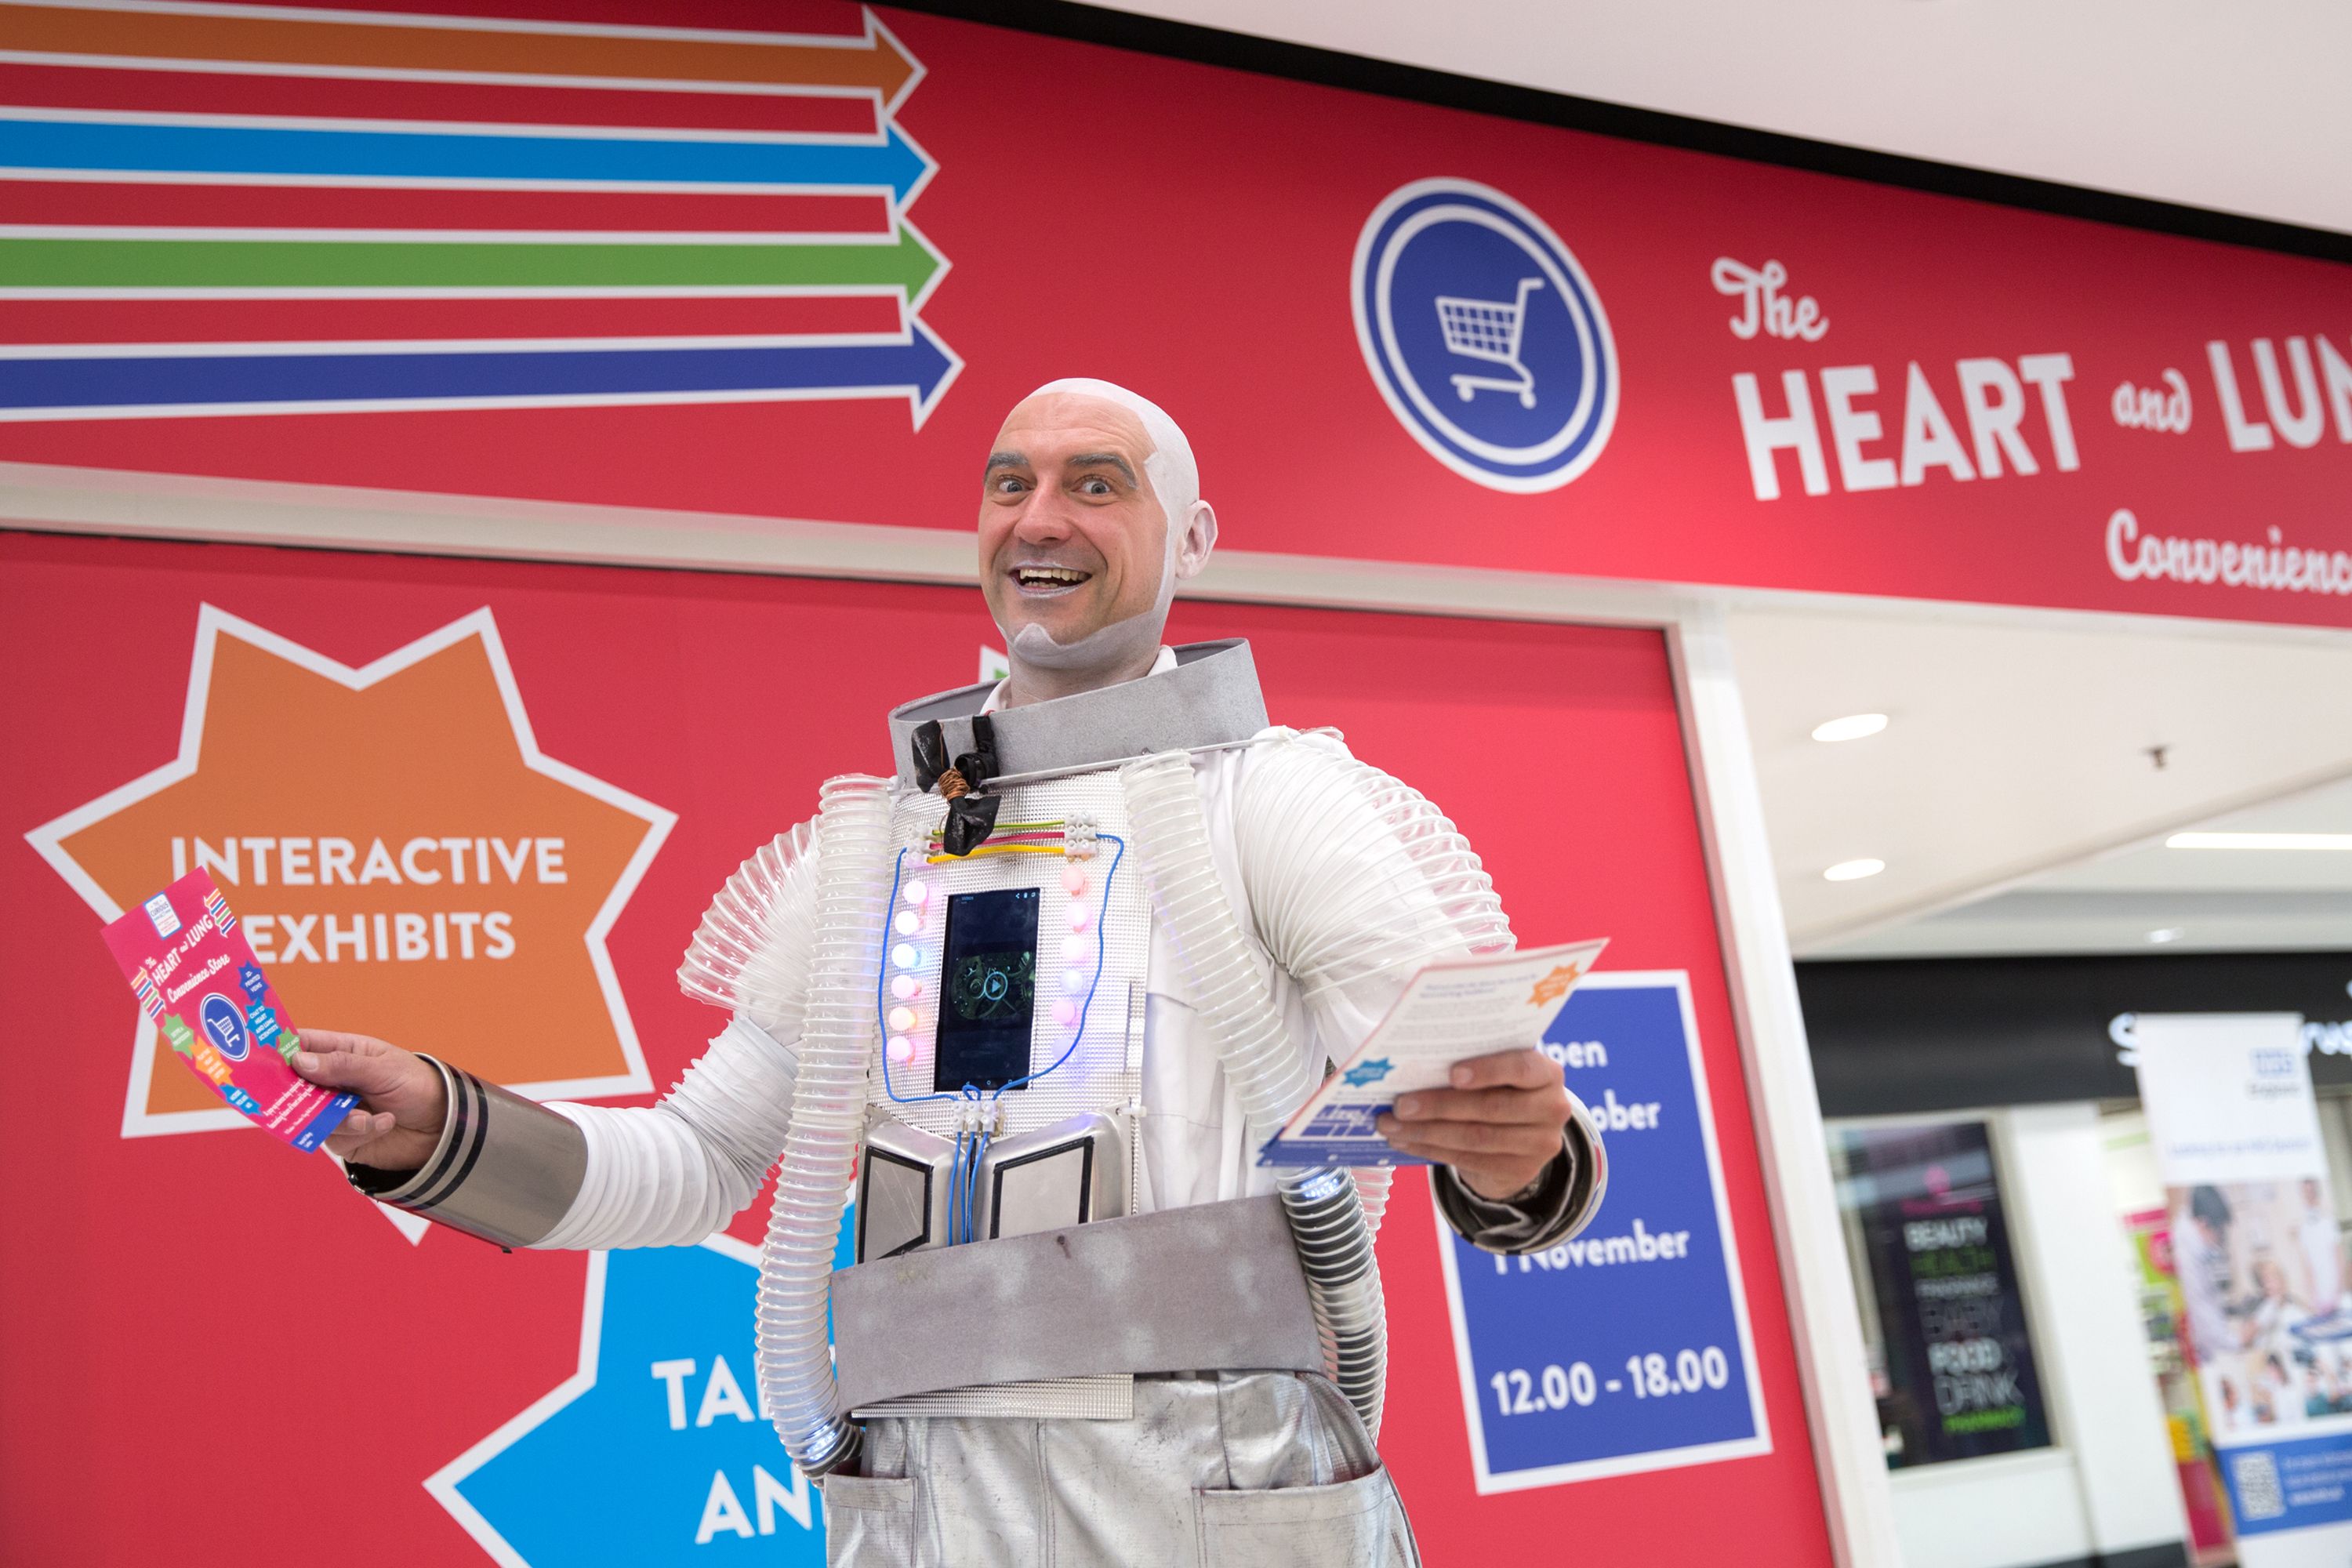 A smiling man dressed up as an astronaut holding a leaflet for the heart and lung popup